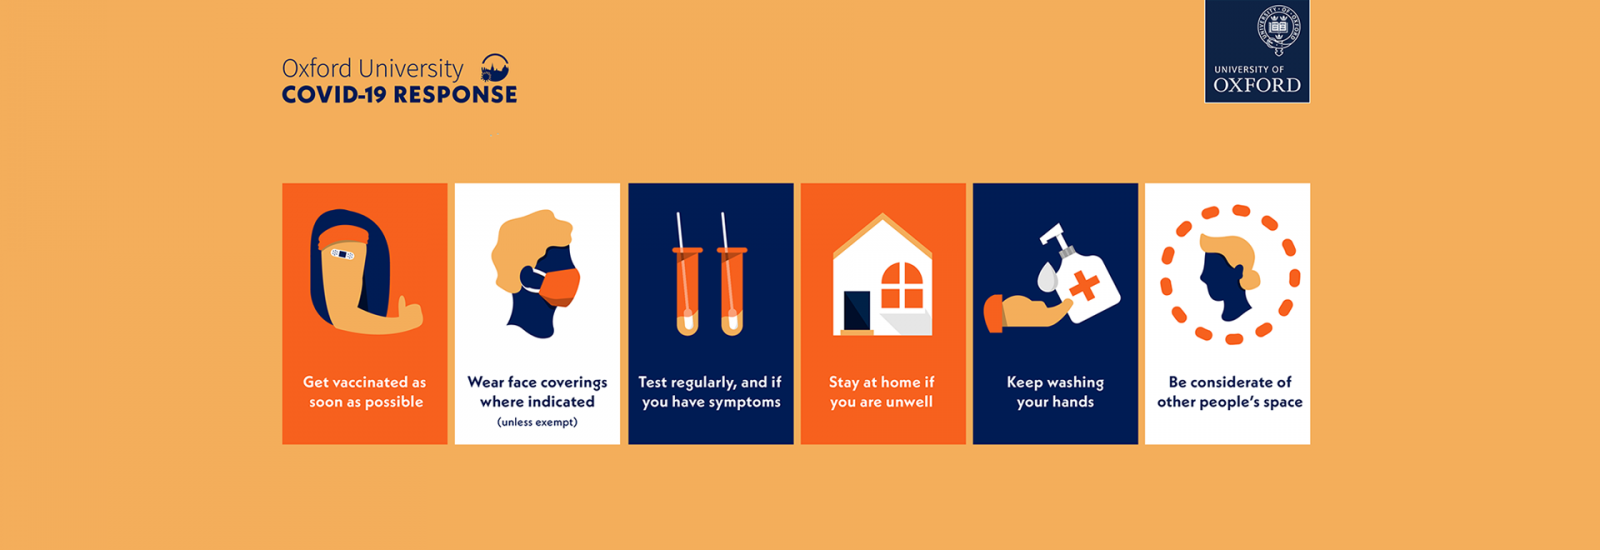 Health campaign banner with messaging and illustrations. Credits: Univ. of Oxford